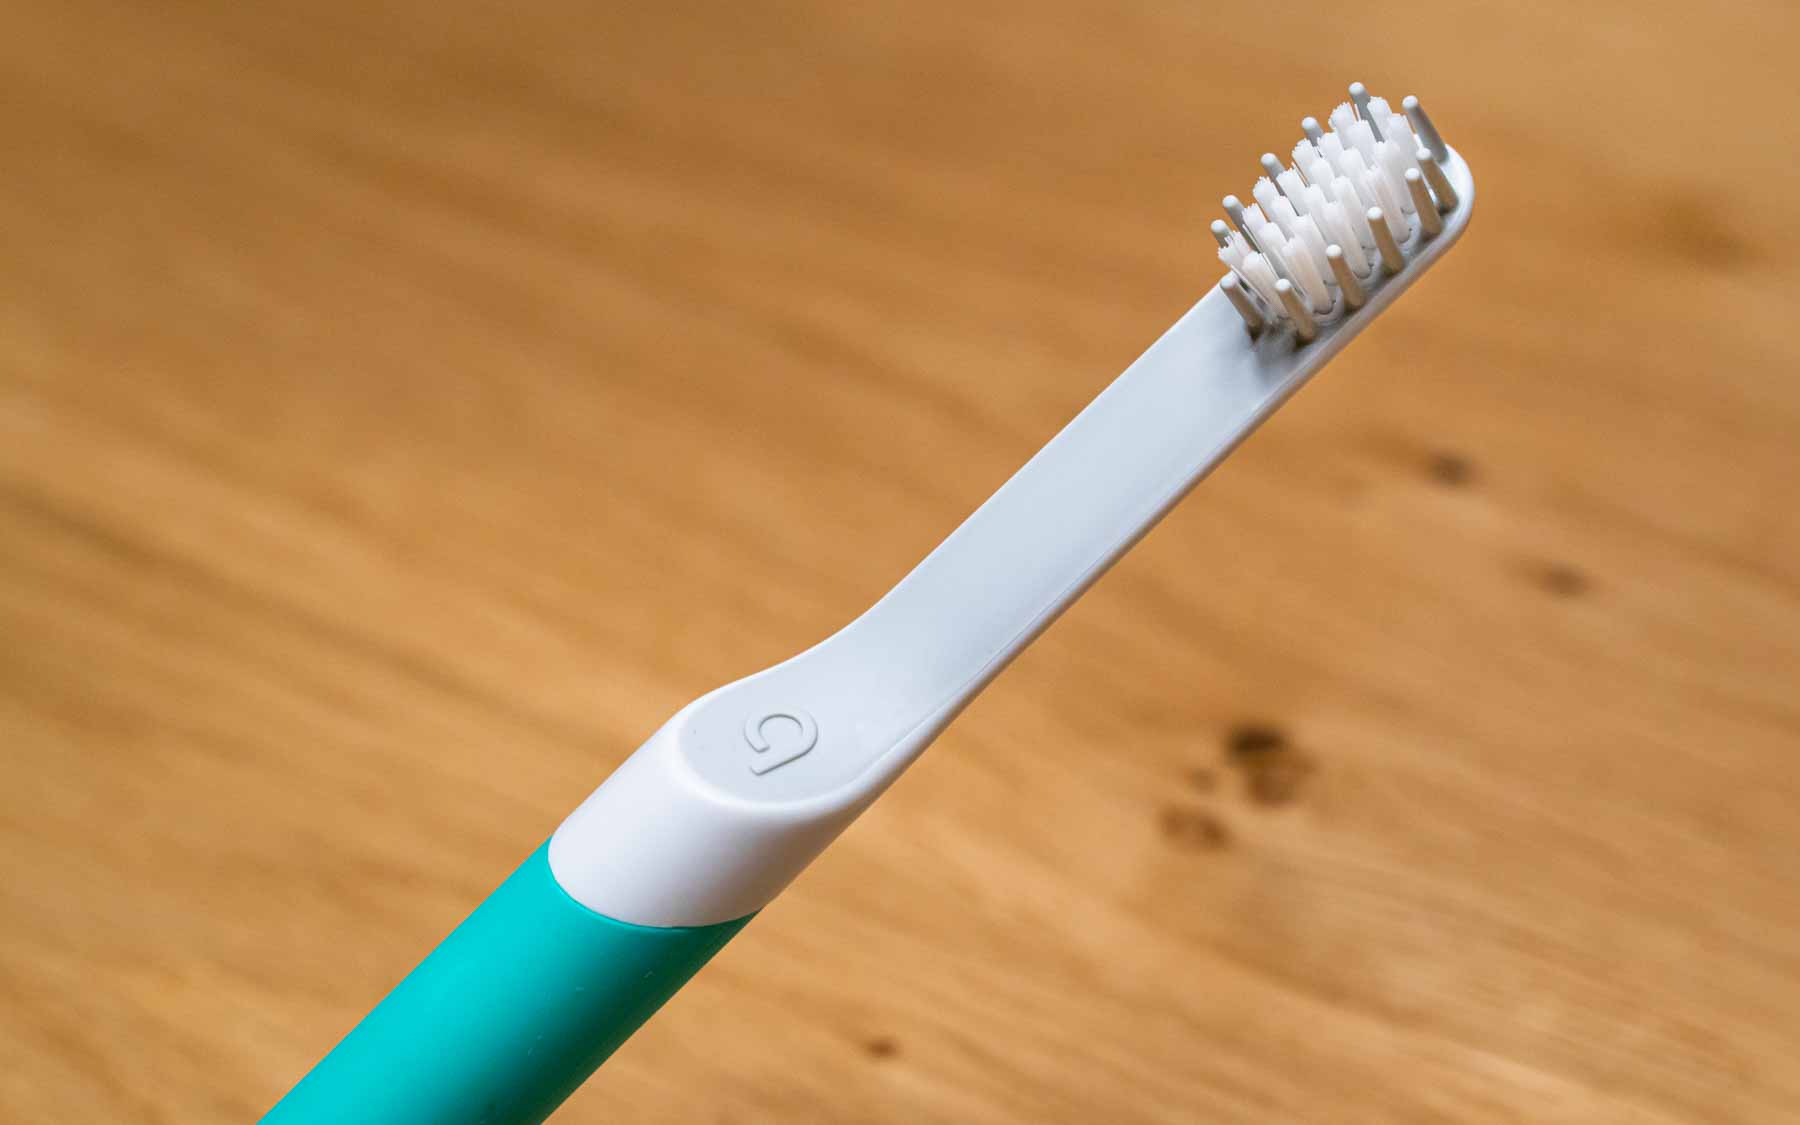 The standard Quip electric toothbrush.